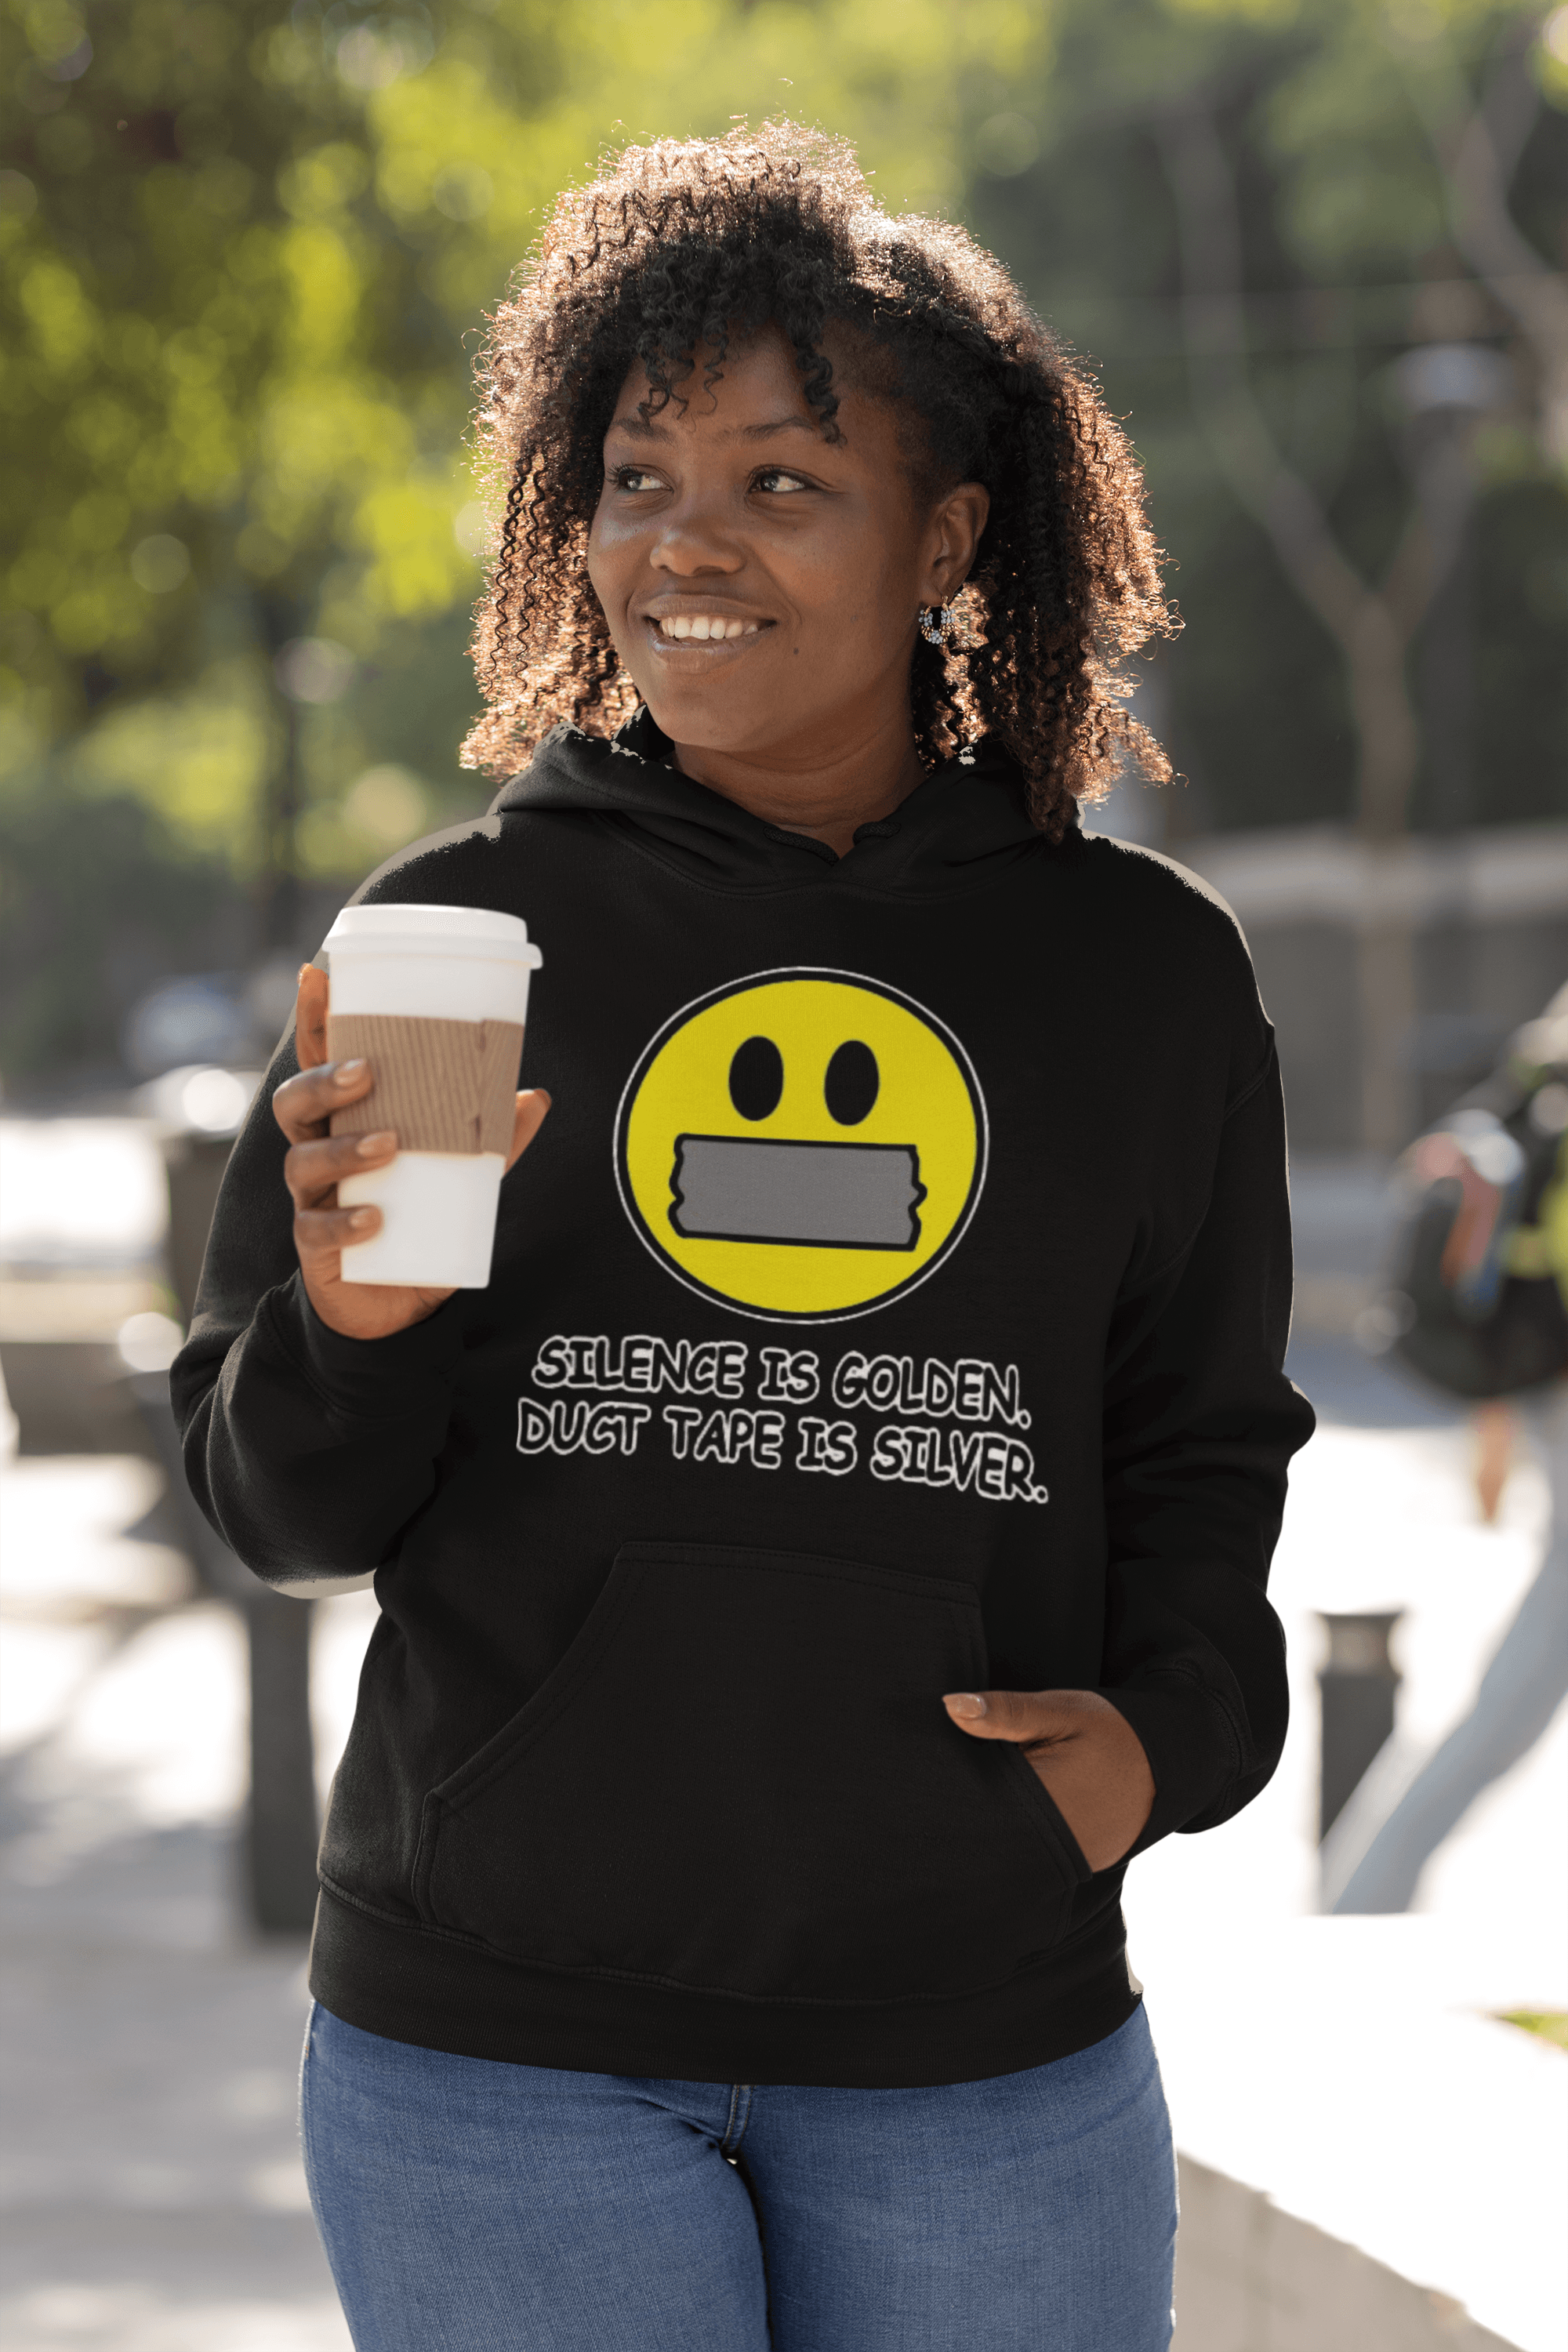 Emoji Hoodie Silence is Golden Duct Tape Is Silver Blended Cotton Midweight Pullover - TopKoalaTee